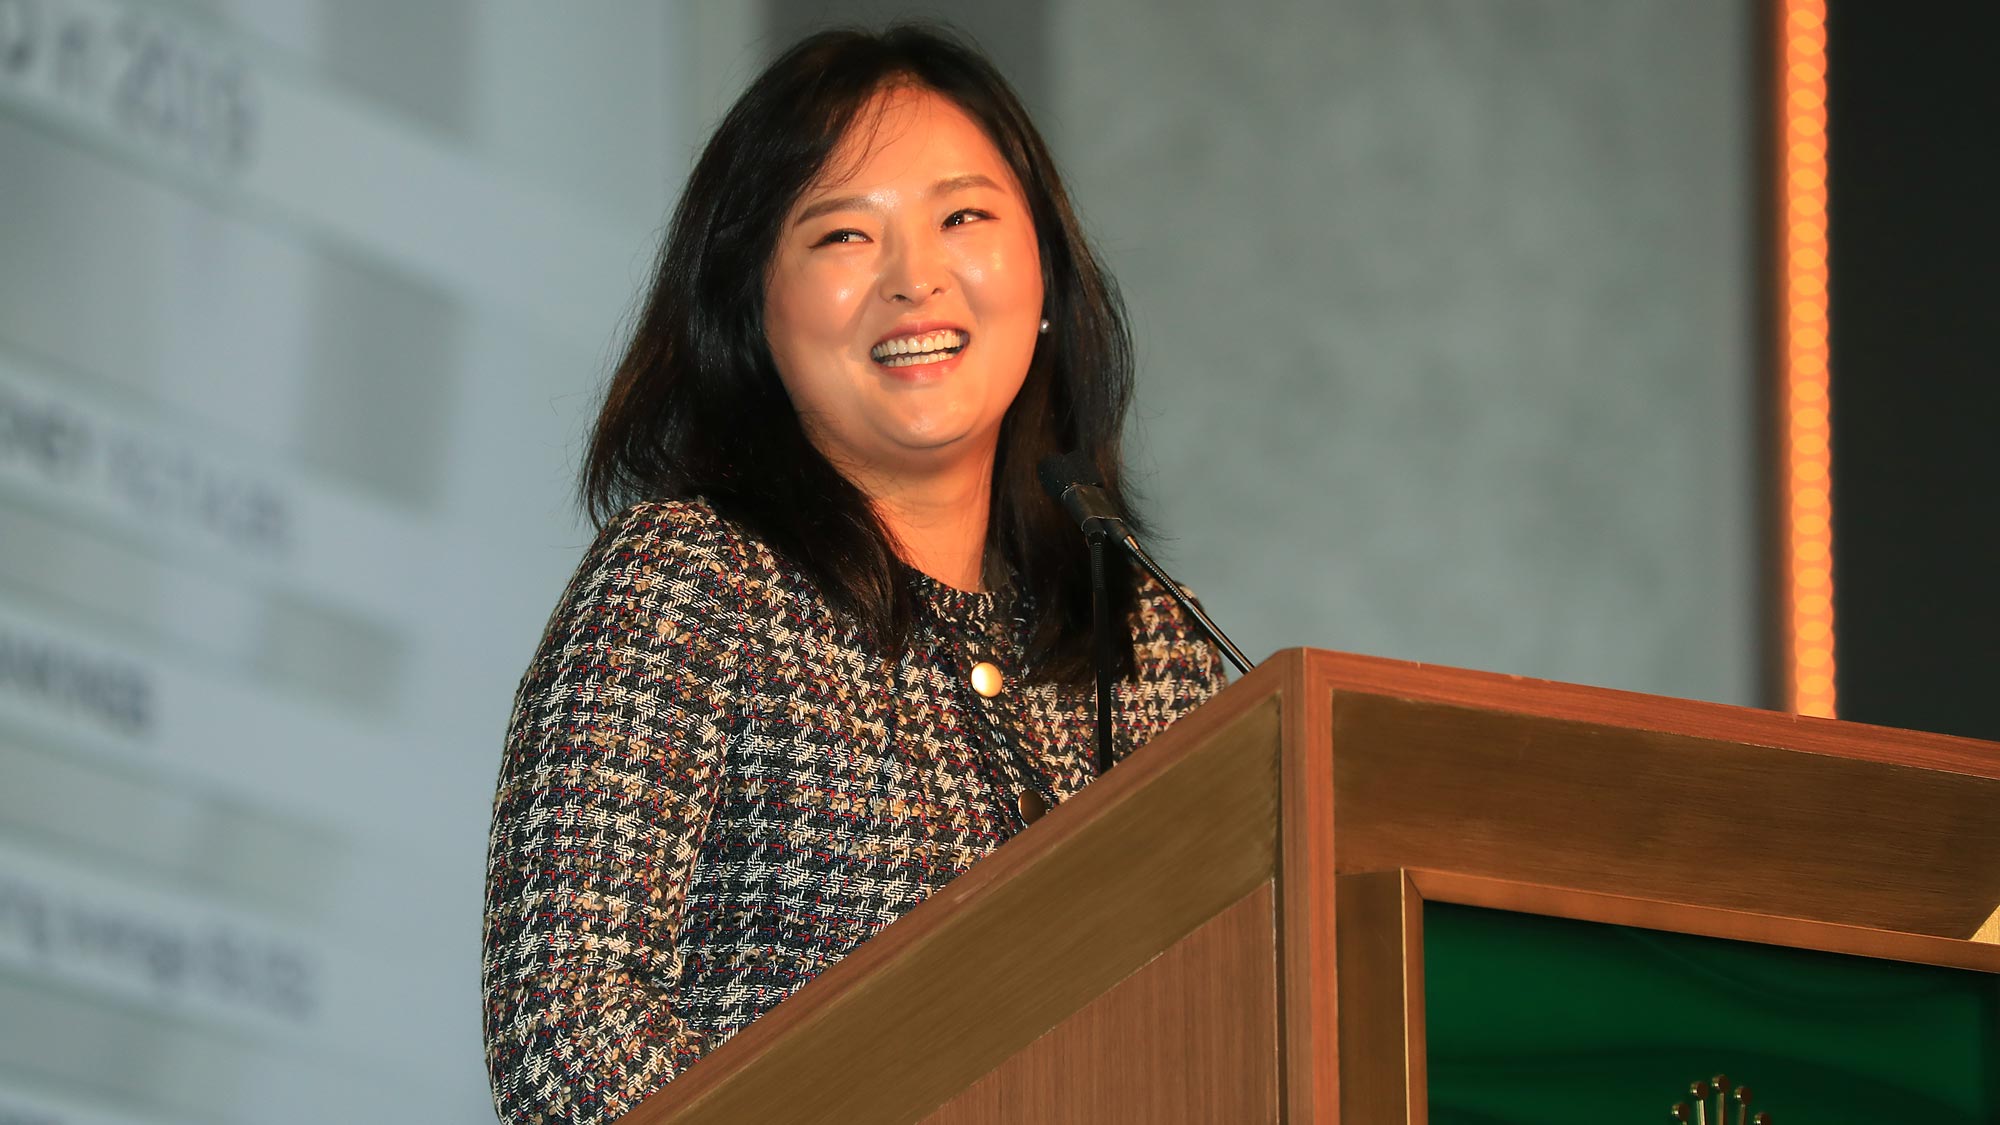 Jin Young Ko of South Korea addresses the crowd after winning the Rolex Player of the Year trophy during the LPGA Rolex Players Awards at the Ritz-Carlton Golf Resort on November 21, 2019 in Naples, Florida